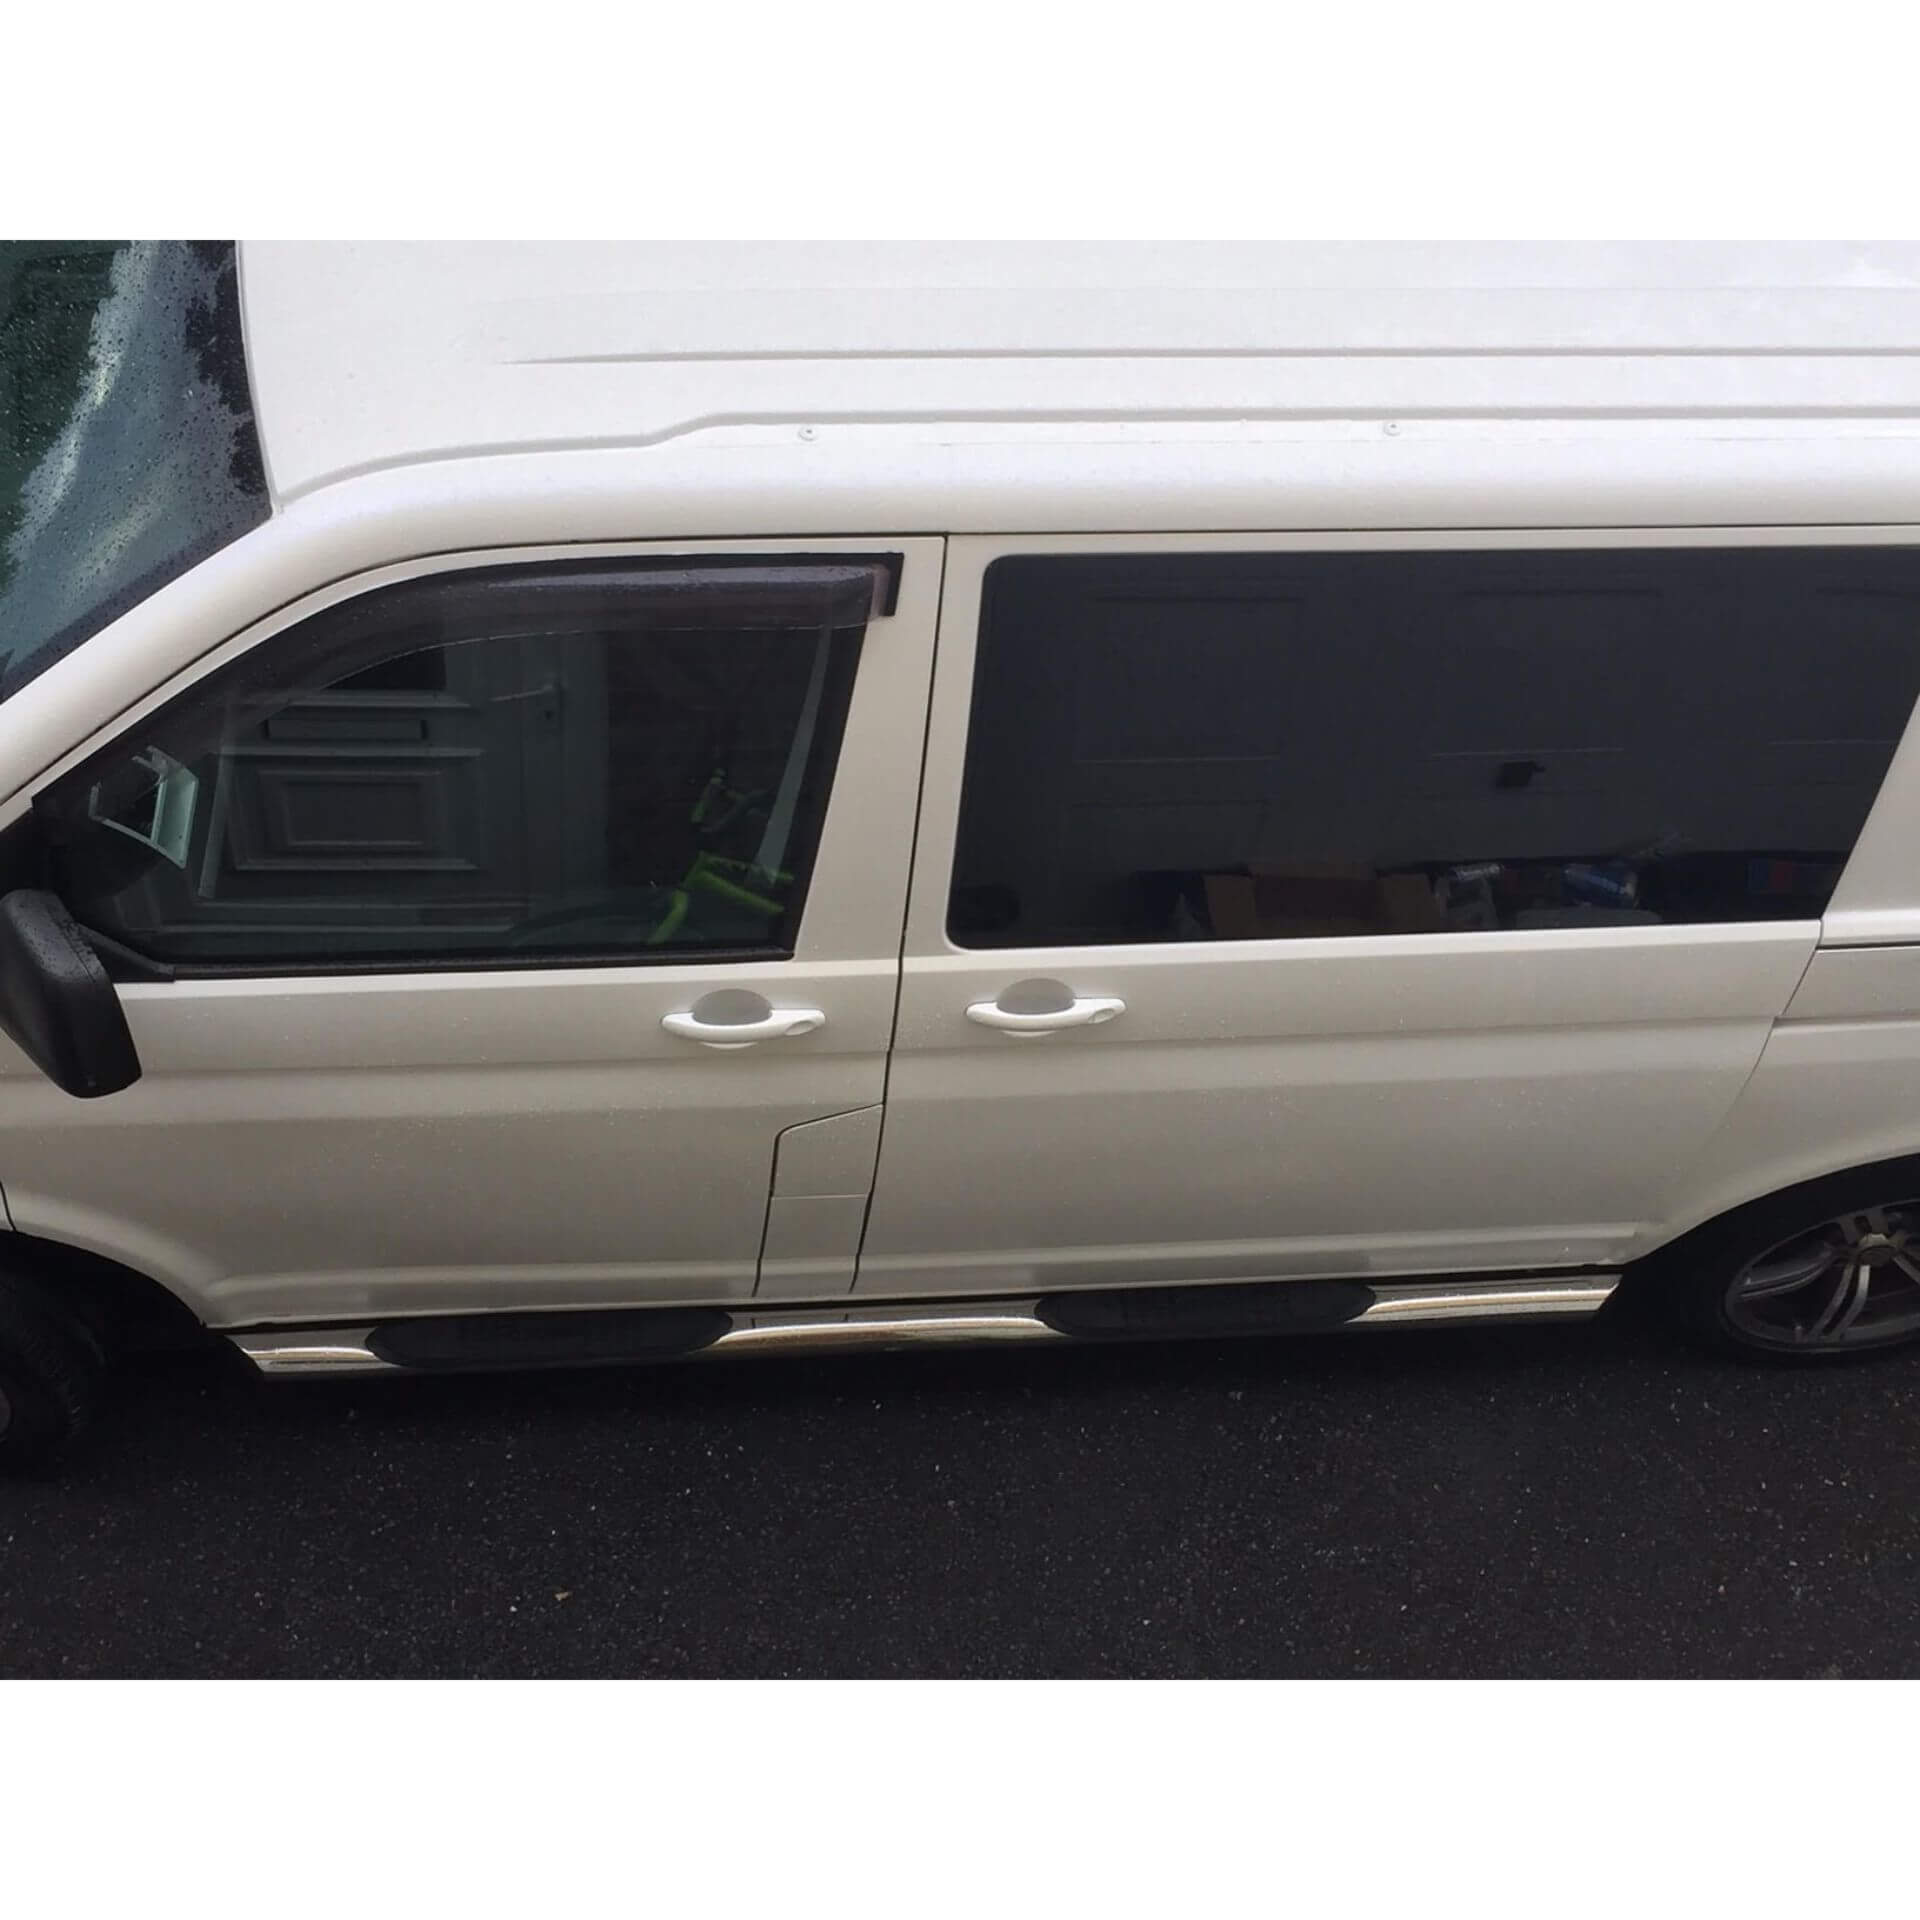 Stainless Steel Side Bars with Step Pads for Volkswagen Transporter T6 SWB -  - sold by Direct4x4